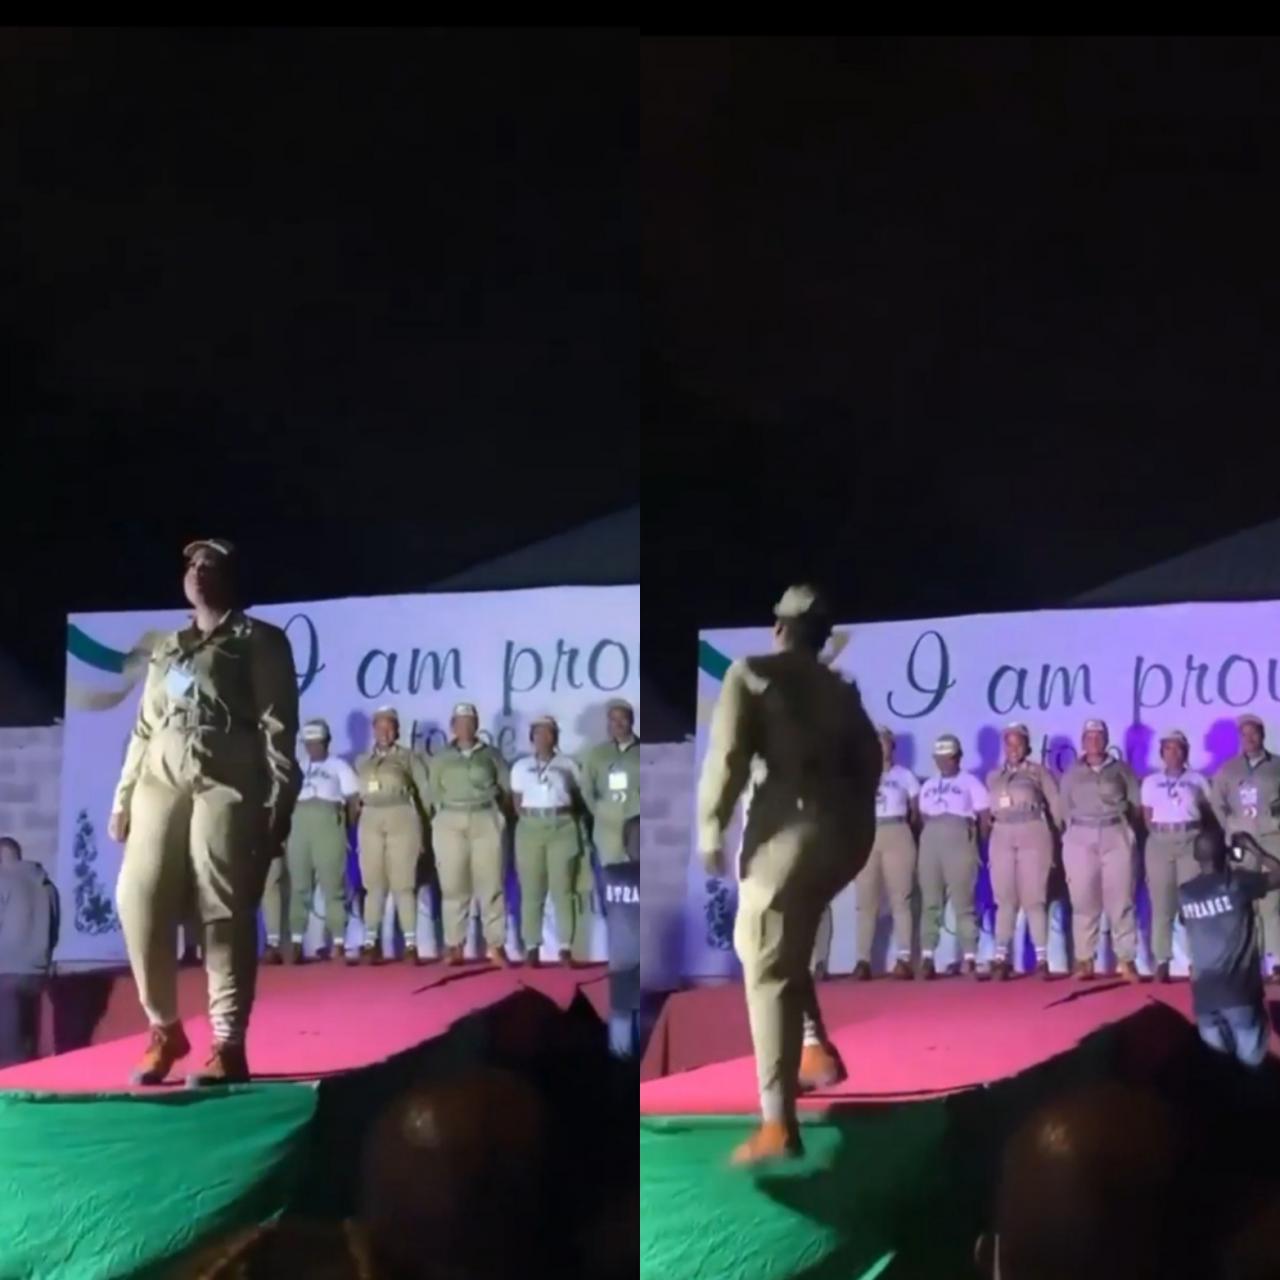 Corps member falls off stage during presentation in orientation camp (video)